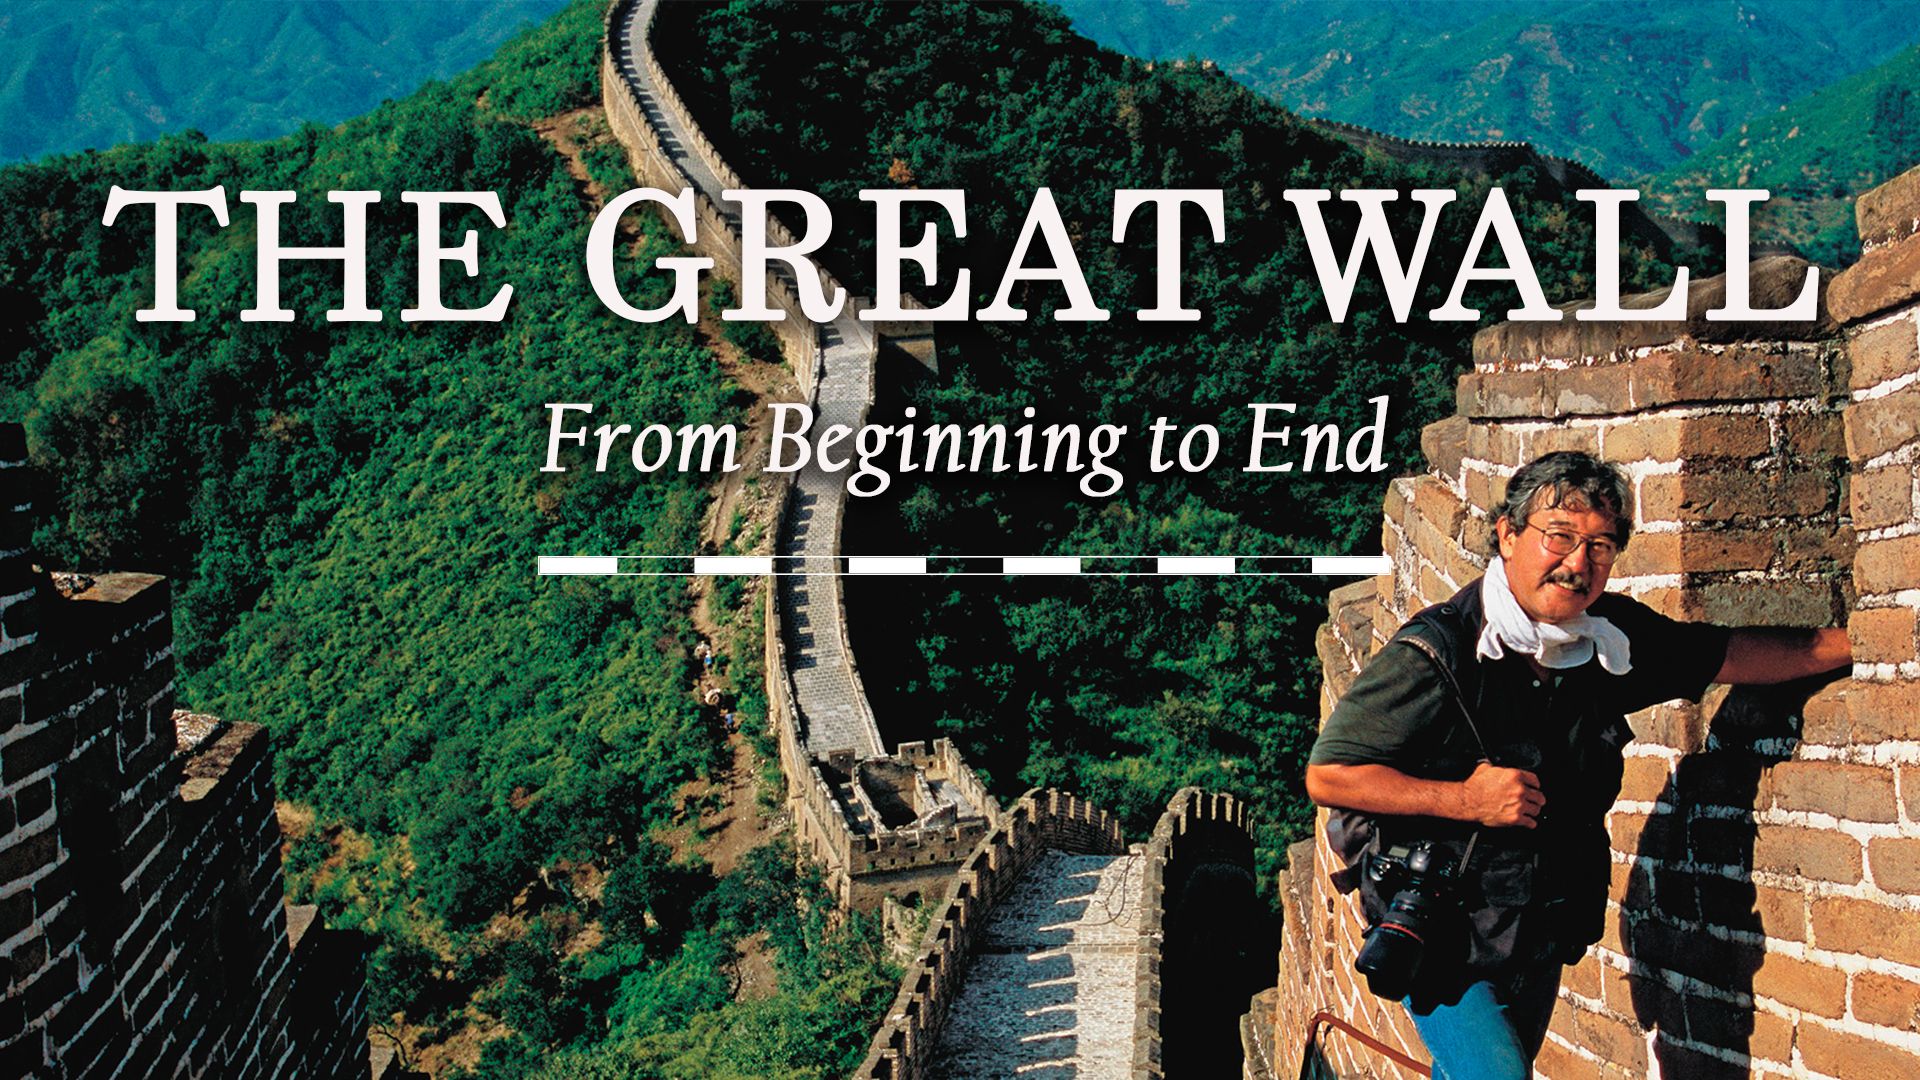 The Great Wall: From Beginning to End